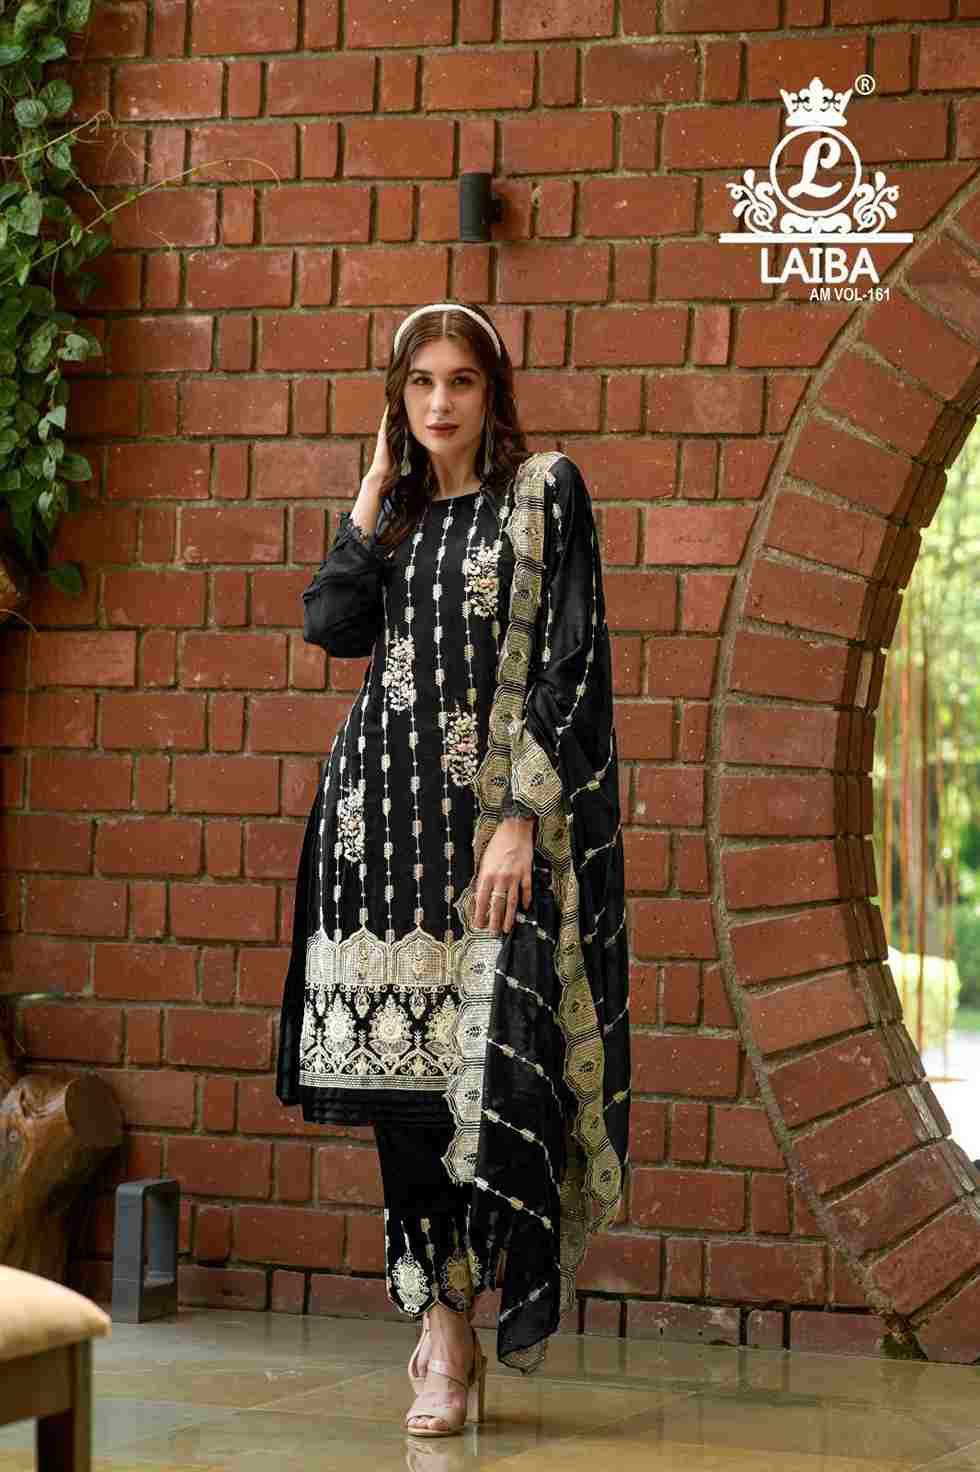 AM Vol-161 By Laiba 161-A To 161-D Series Beautiful Stylish Festive Suits Fancy Colorful Casual Wear & Ethnic Wear & Ready To Wear Pure Georgette Embroidered Dresses At Wholesale Price